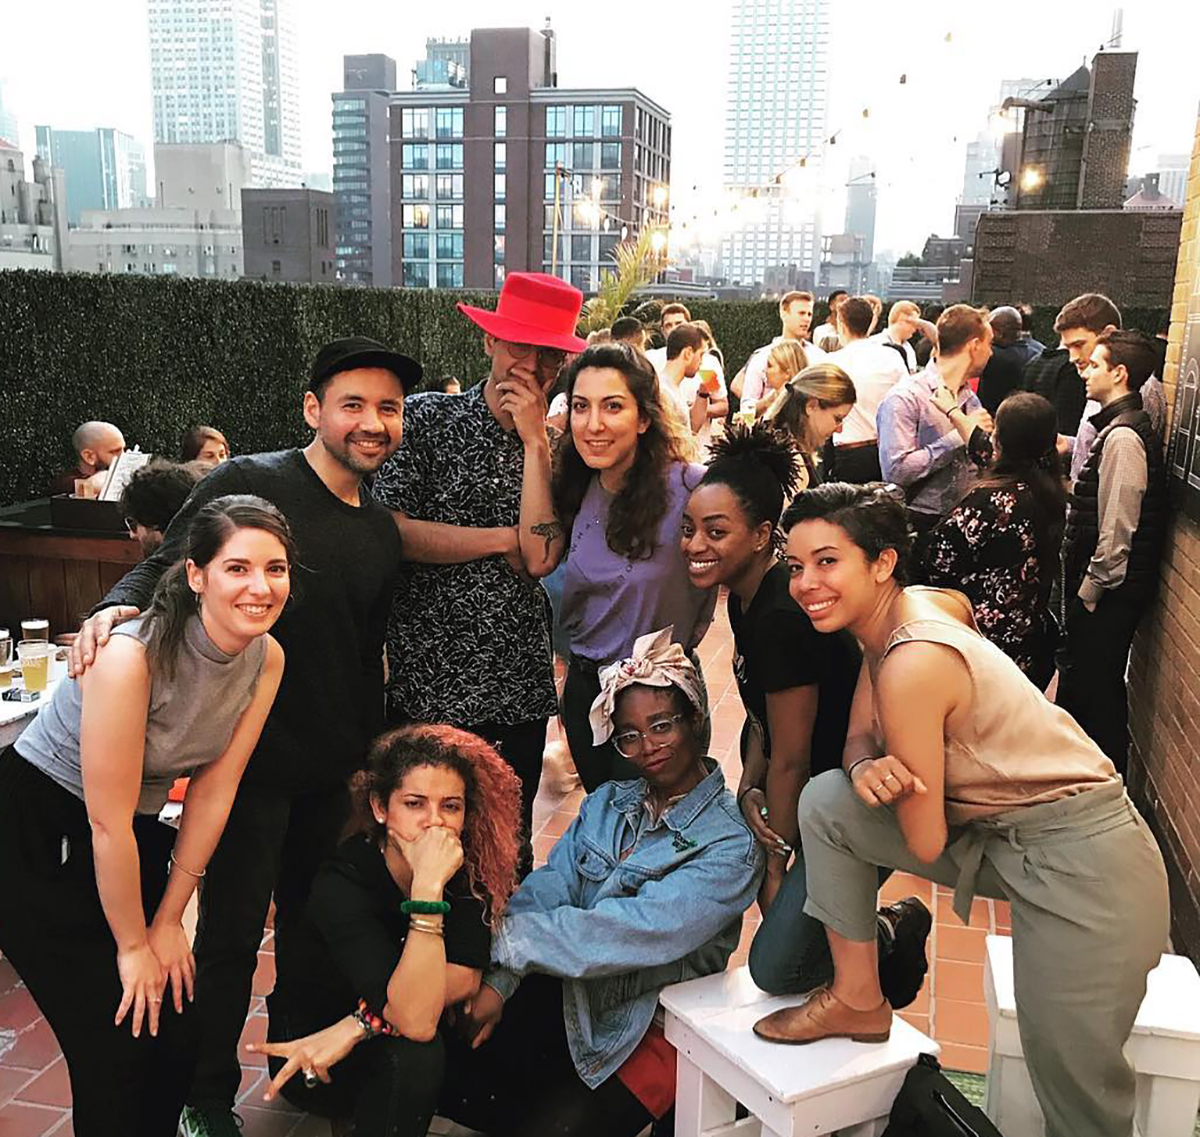 Classmates having drinks at a New York rooftop